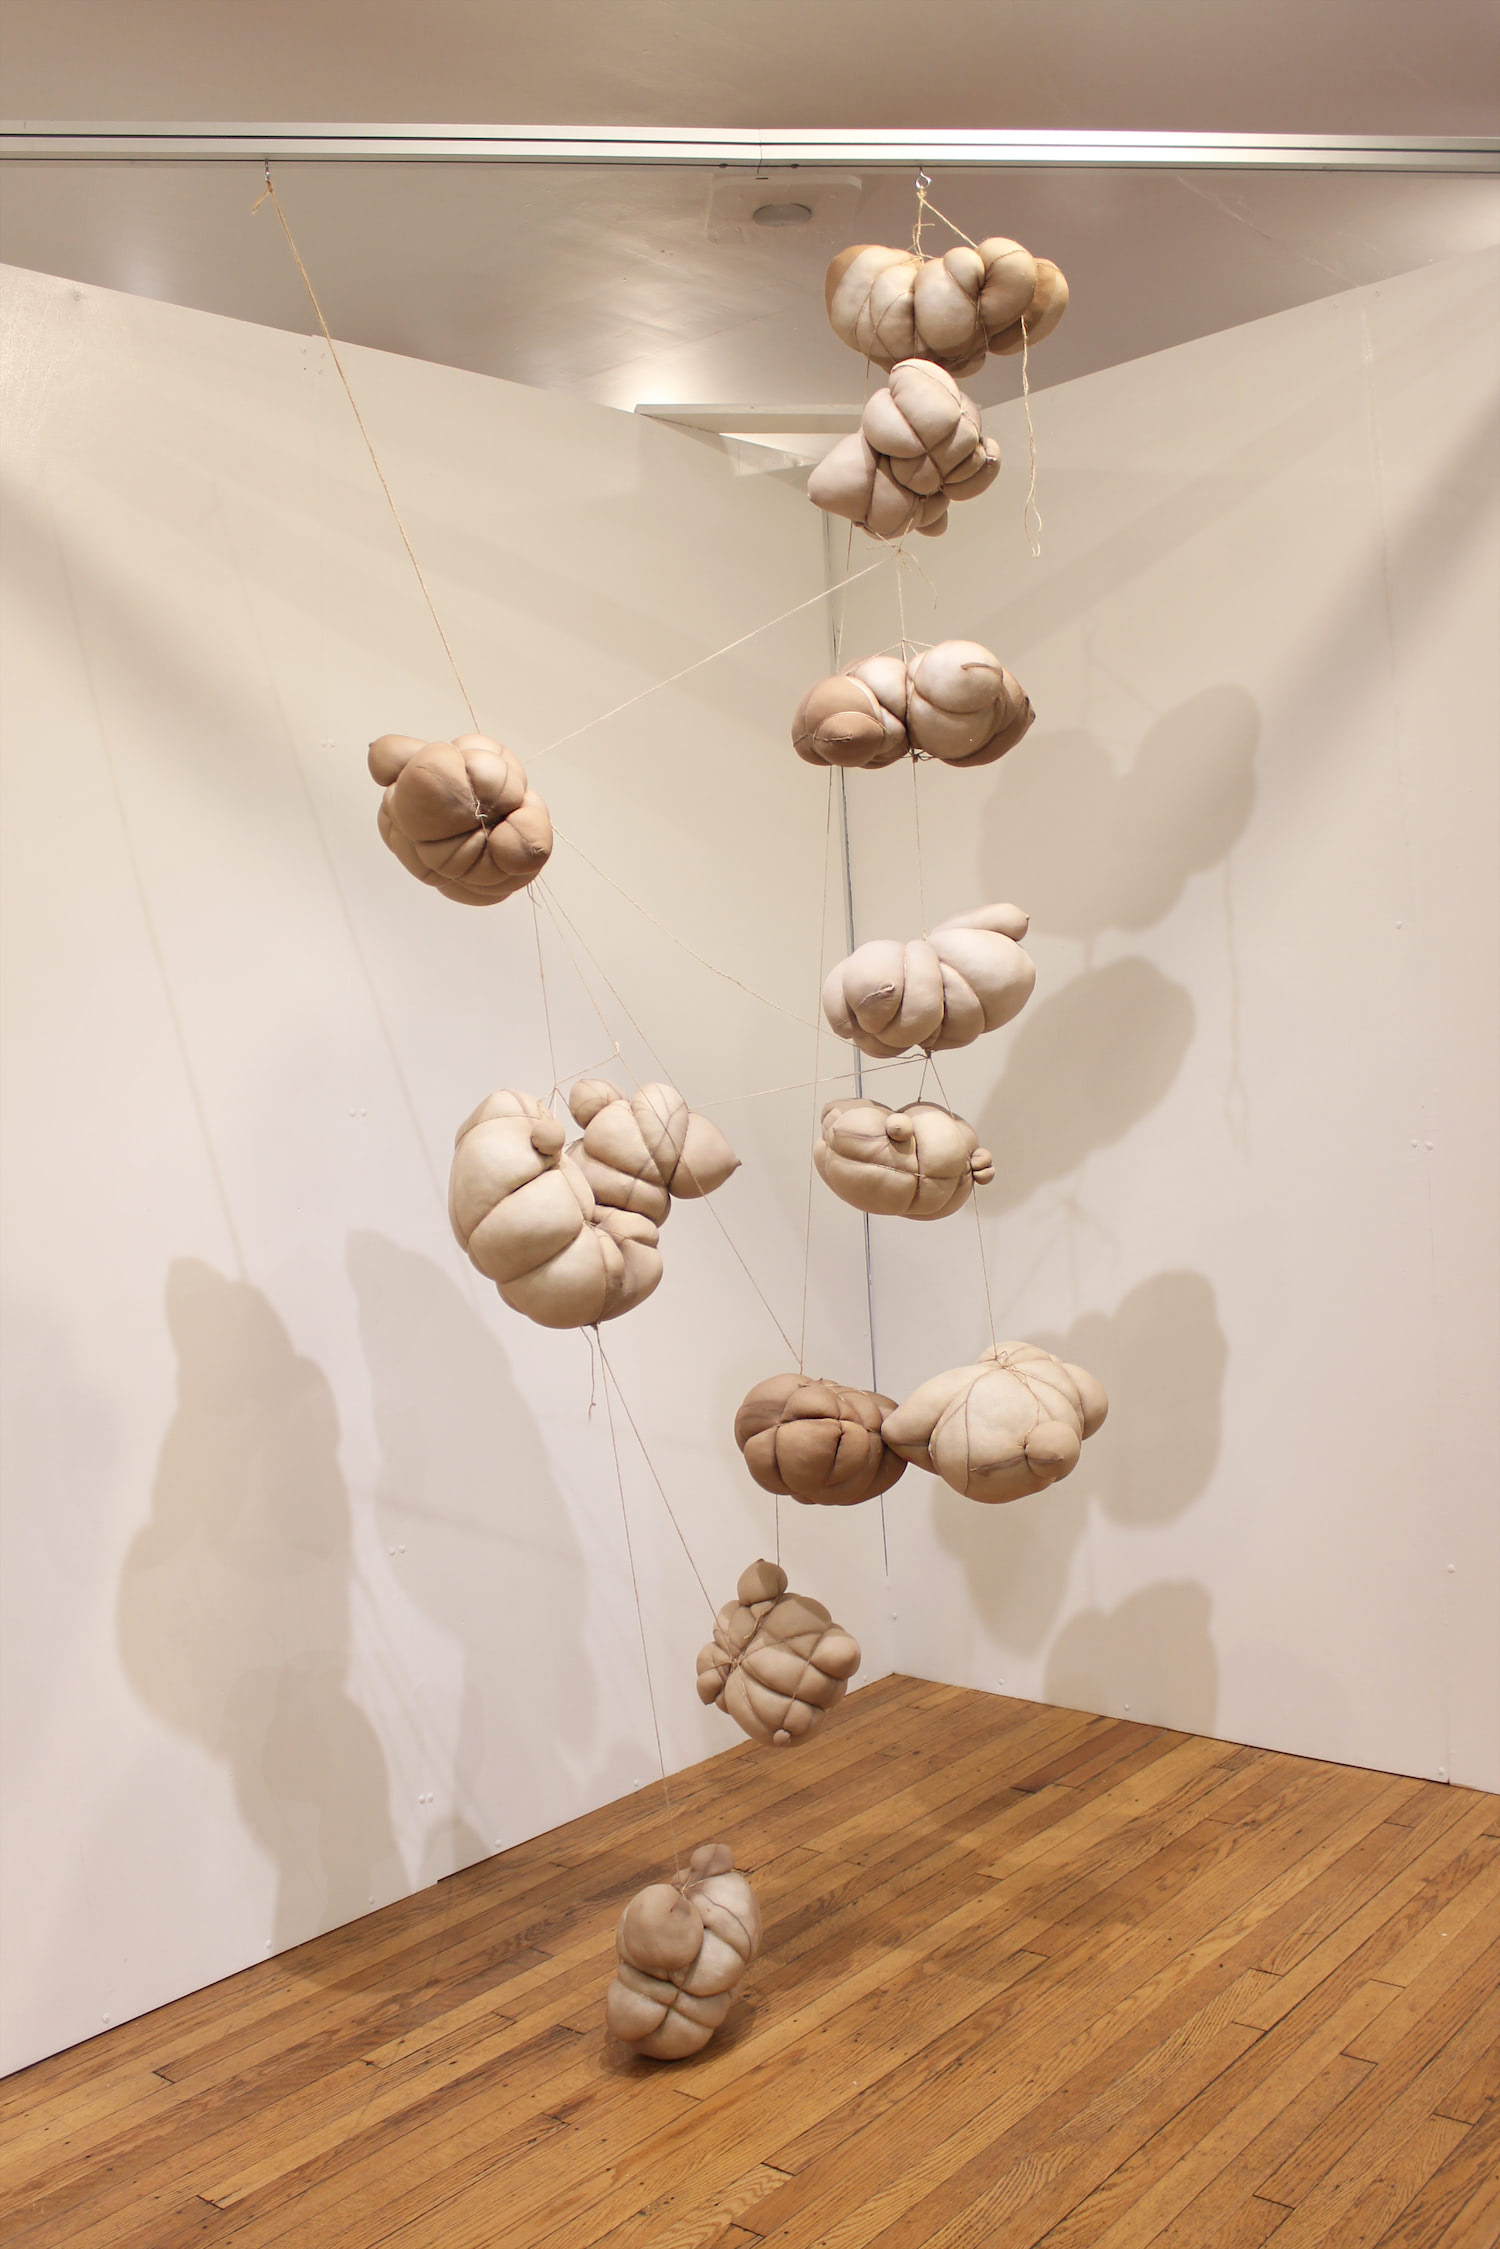 This image shows the other hanging sculpture within the installation. Multiple rounded soft sculpture forms are wrapped tightly to create the visually constricted object. These sculptures are also connected together with twine.